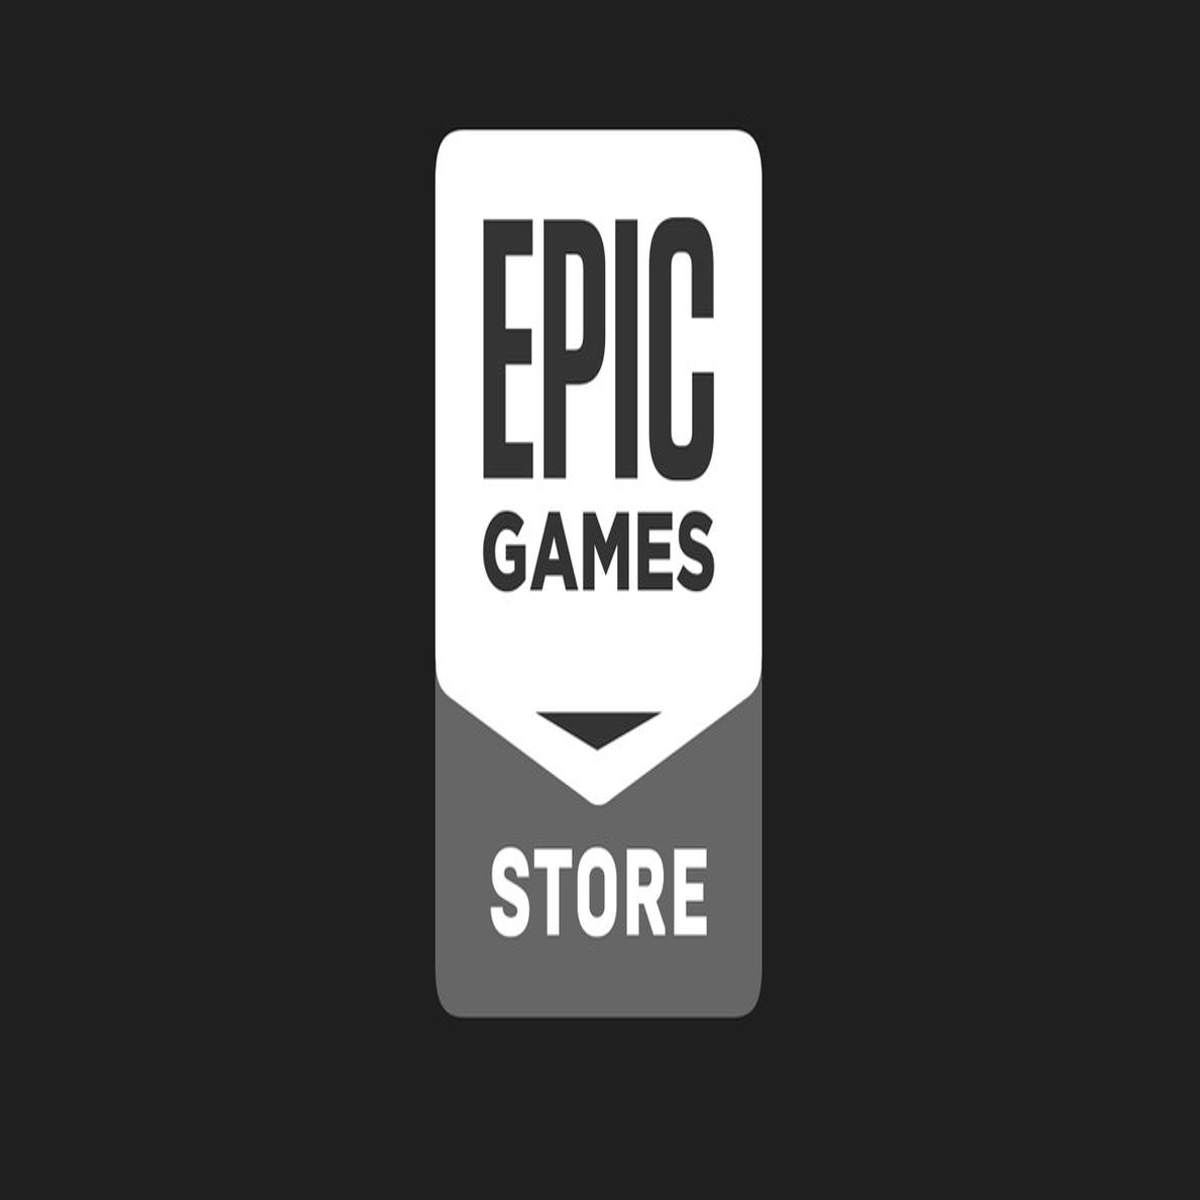 The App Store As We Know It Is Dead, Thanks To Epic Games (And Europe)